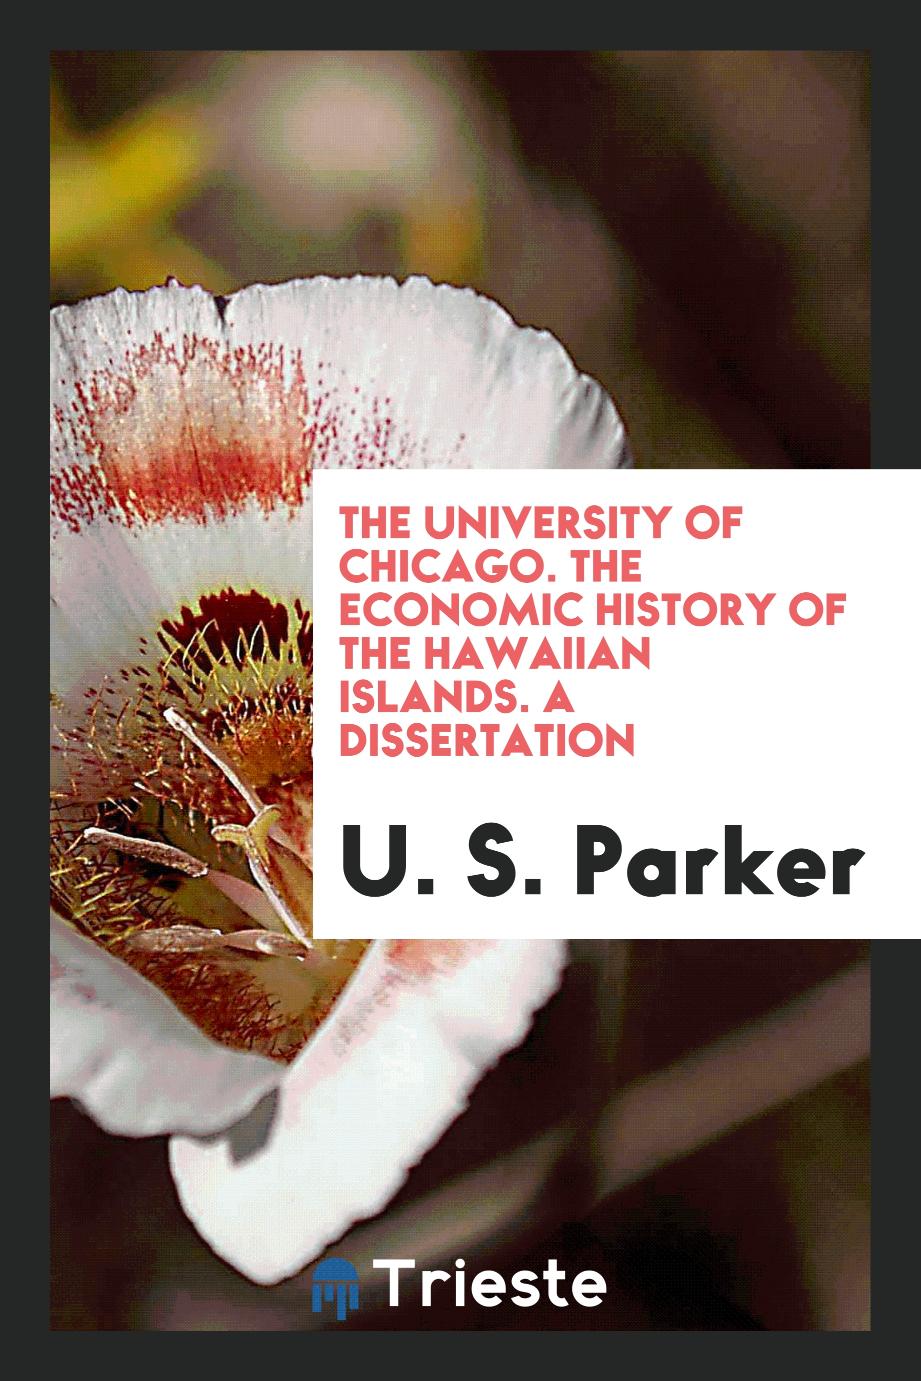 U. S. Parker - The University of Chicago. The Economic History of the Hawaiian Islands. A Dissertation